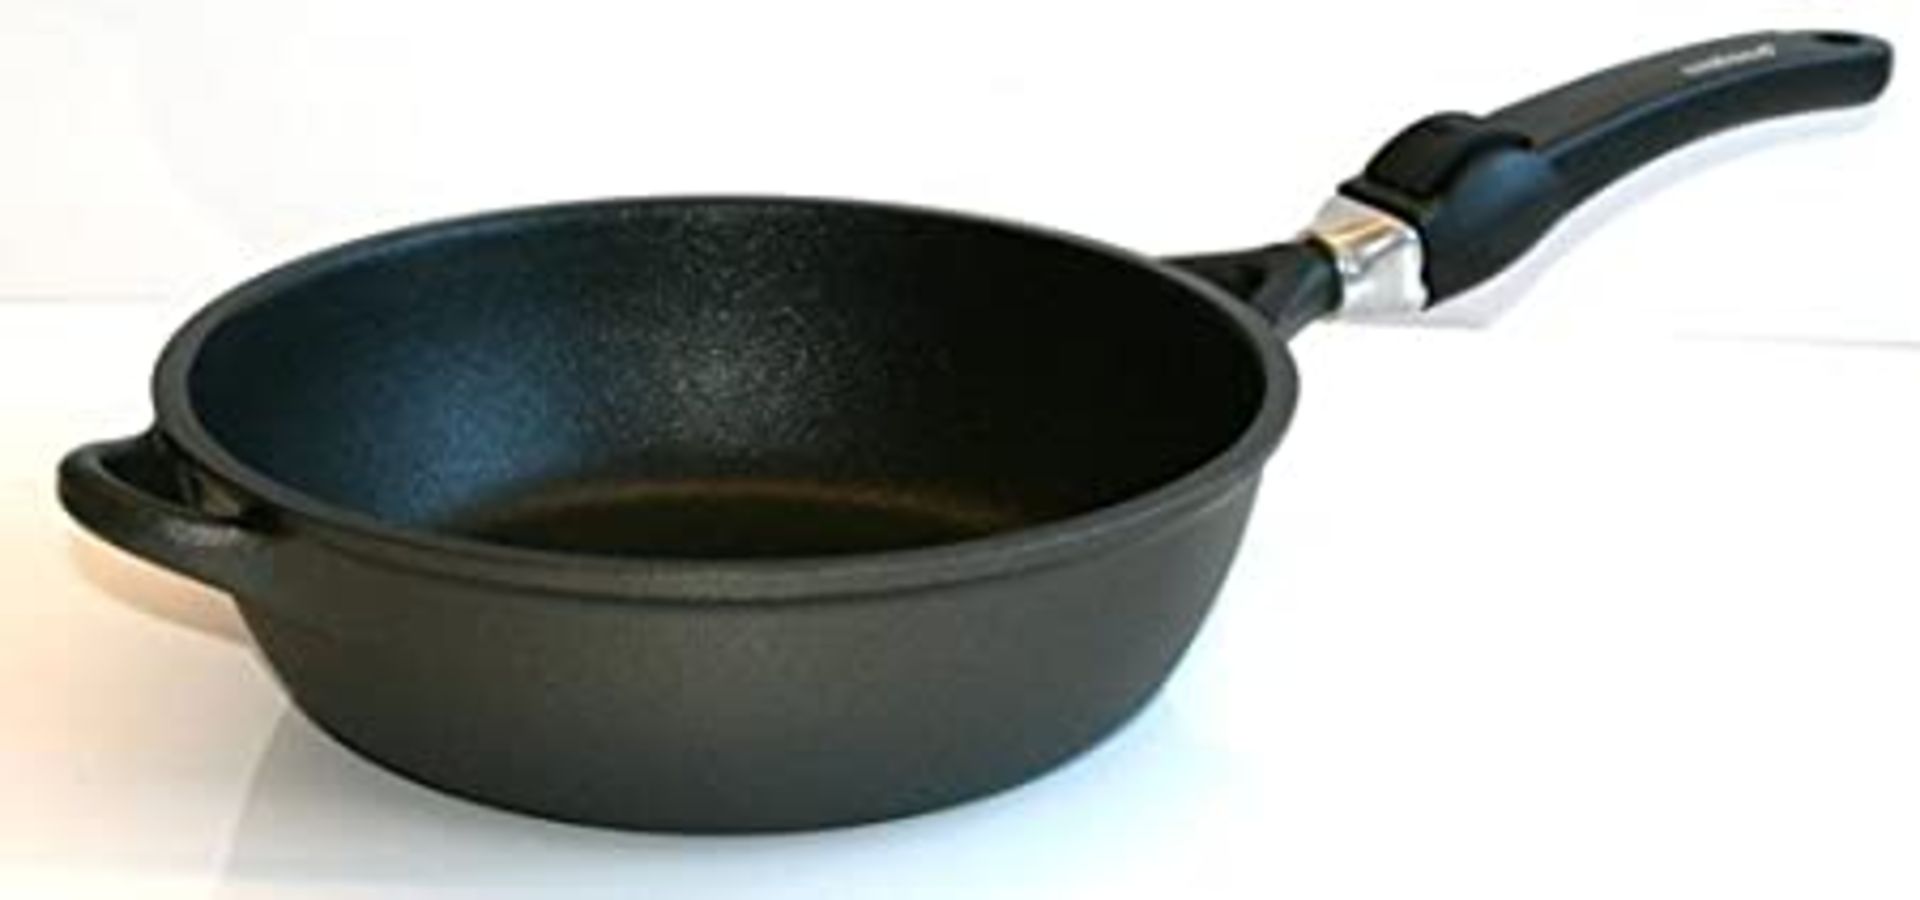 Crafond 28cm Saute Pan with detachable handle and lid - Image 3 of 4